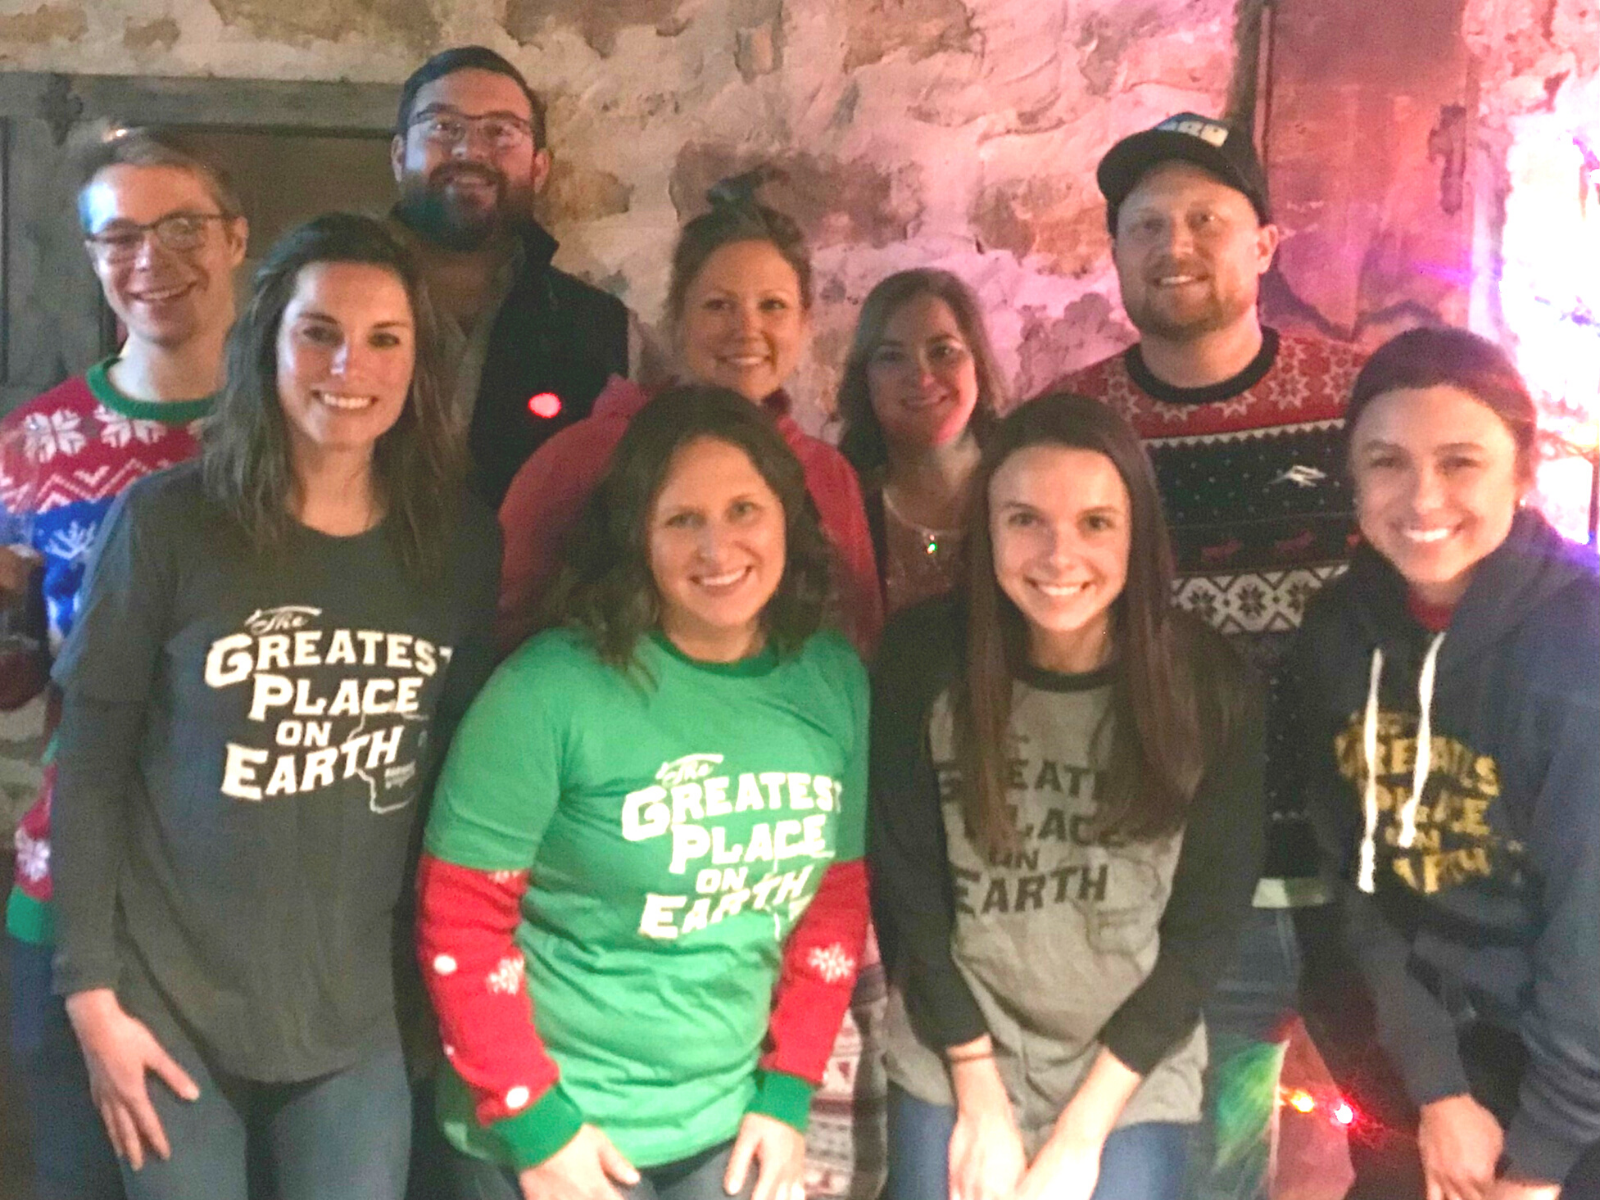 The Greatest Place pon Earth features The Baraboo Young Professionals